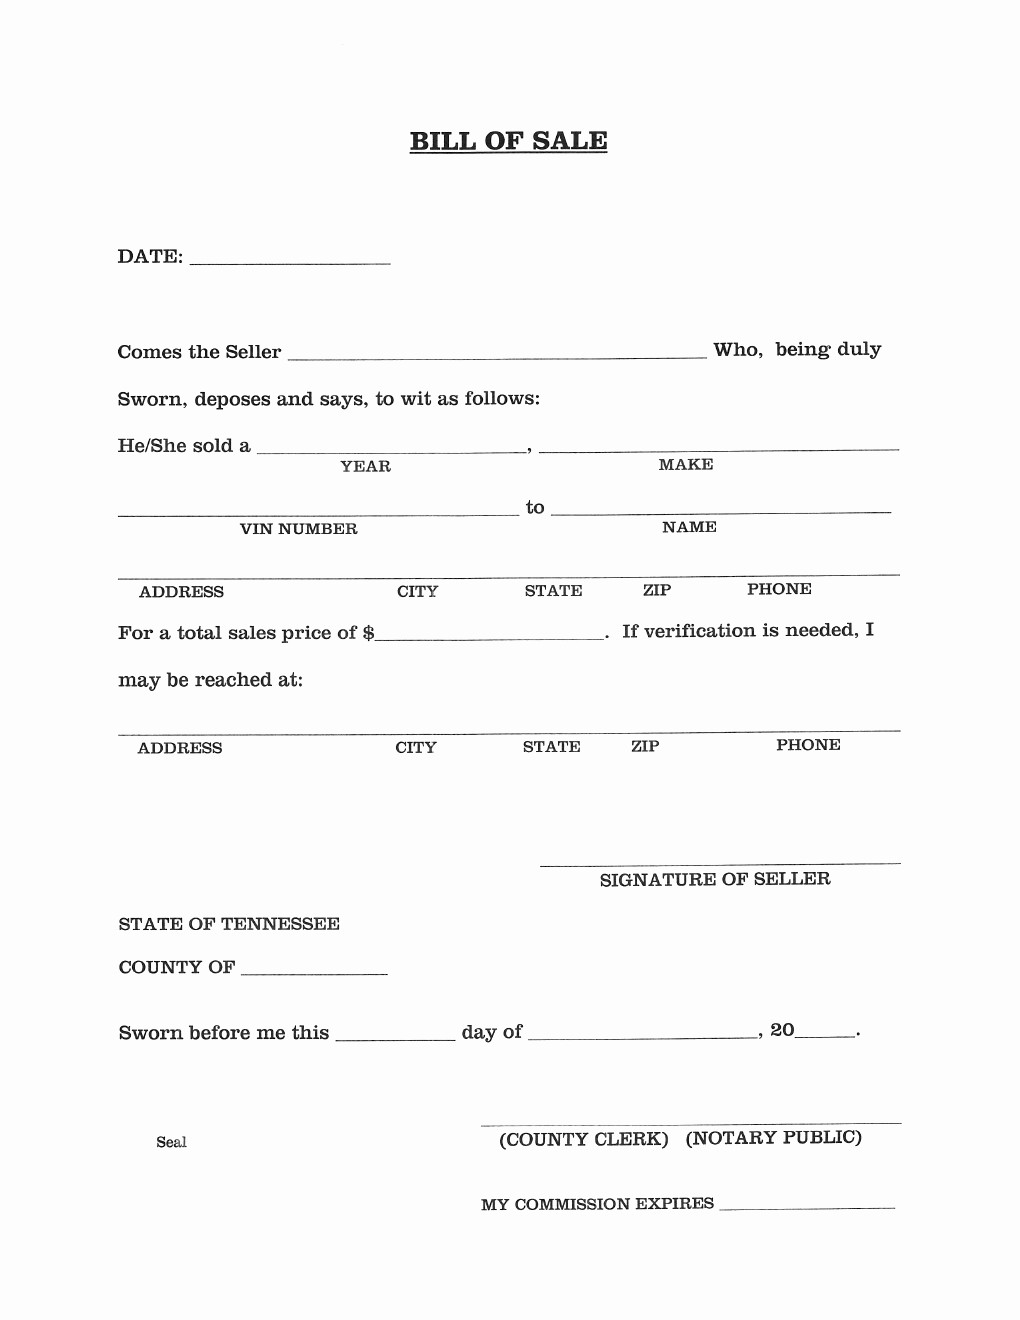 Free forms Bill Of Sale Awesome Free Tennessee Vehicle Bill Of Sale form Download Pdf